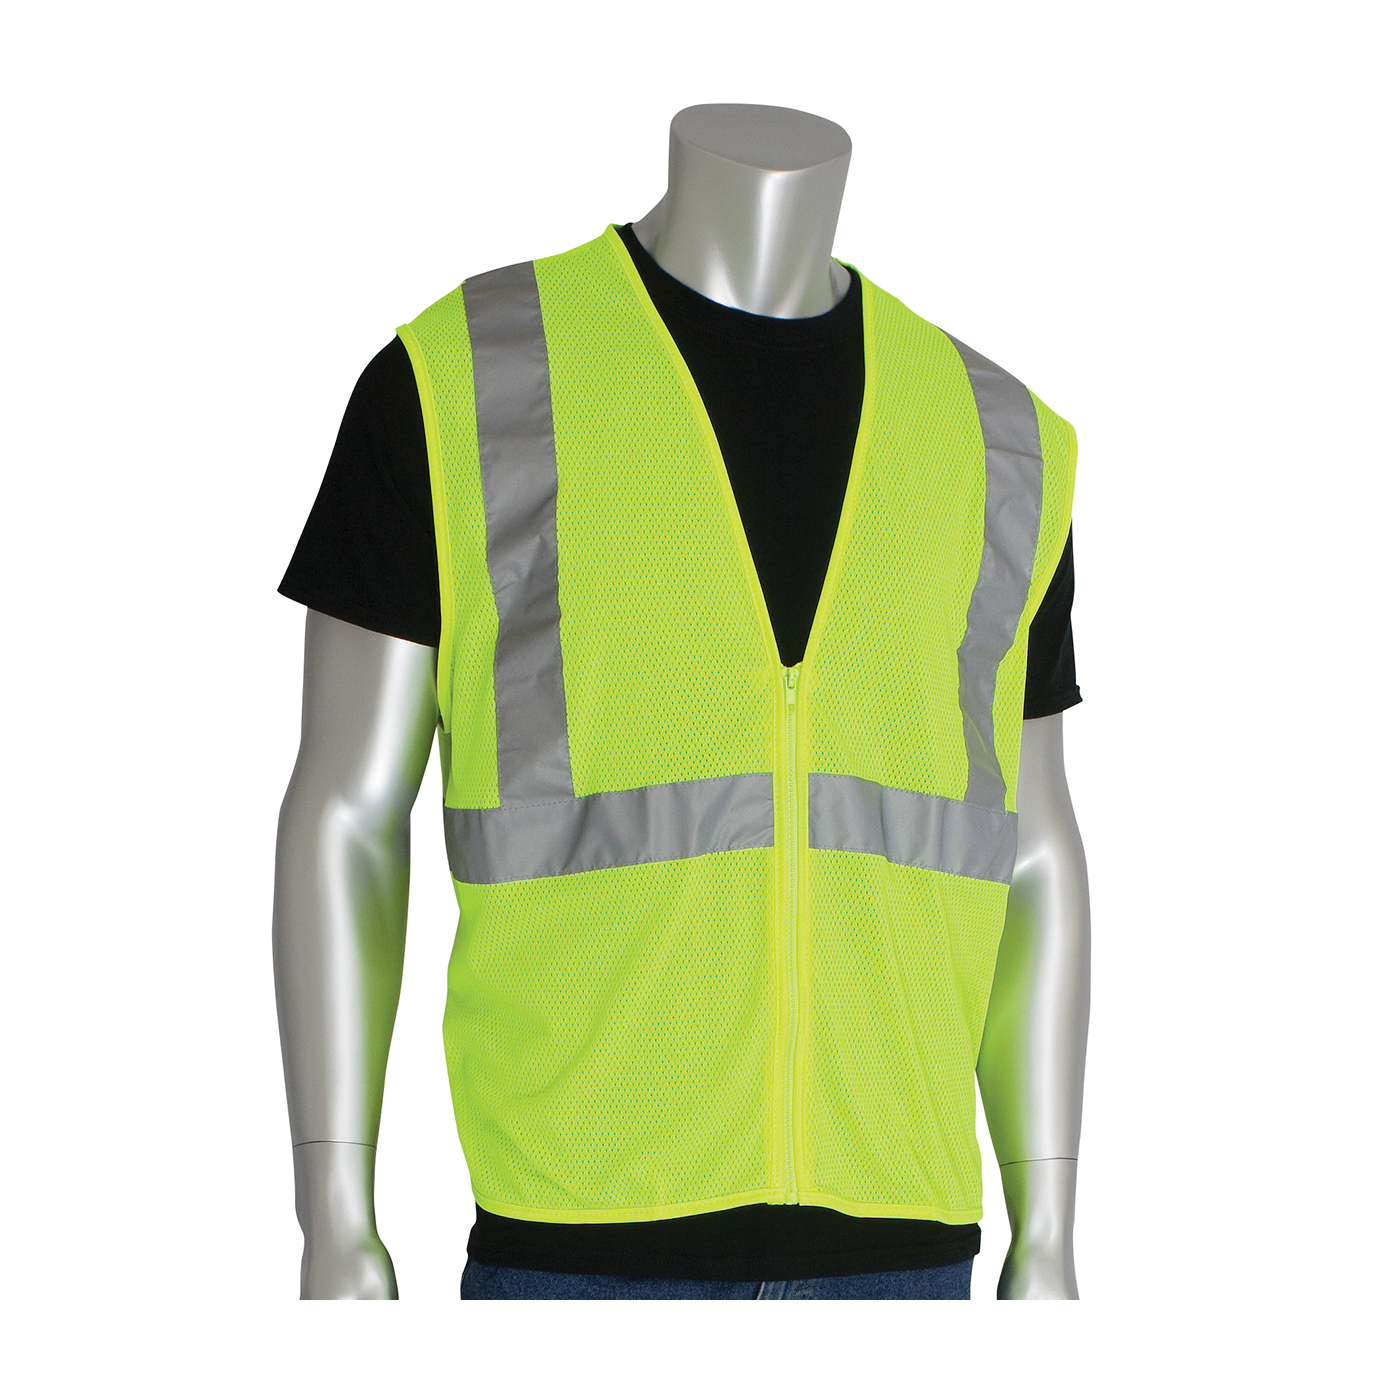 PIP® 302-MVGZLY-5X Safety Vest, 5XL, Hi-Viz Lime Yellow, Polyester Mesh, Zipper Closure, ANSI Class: Class 2, Specifications Met: ANSI 107 Type R